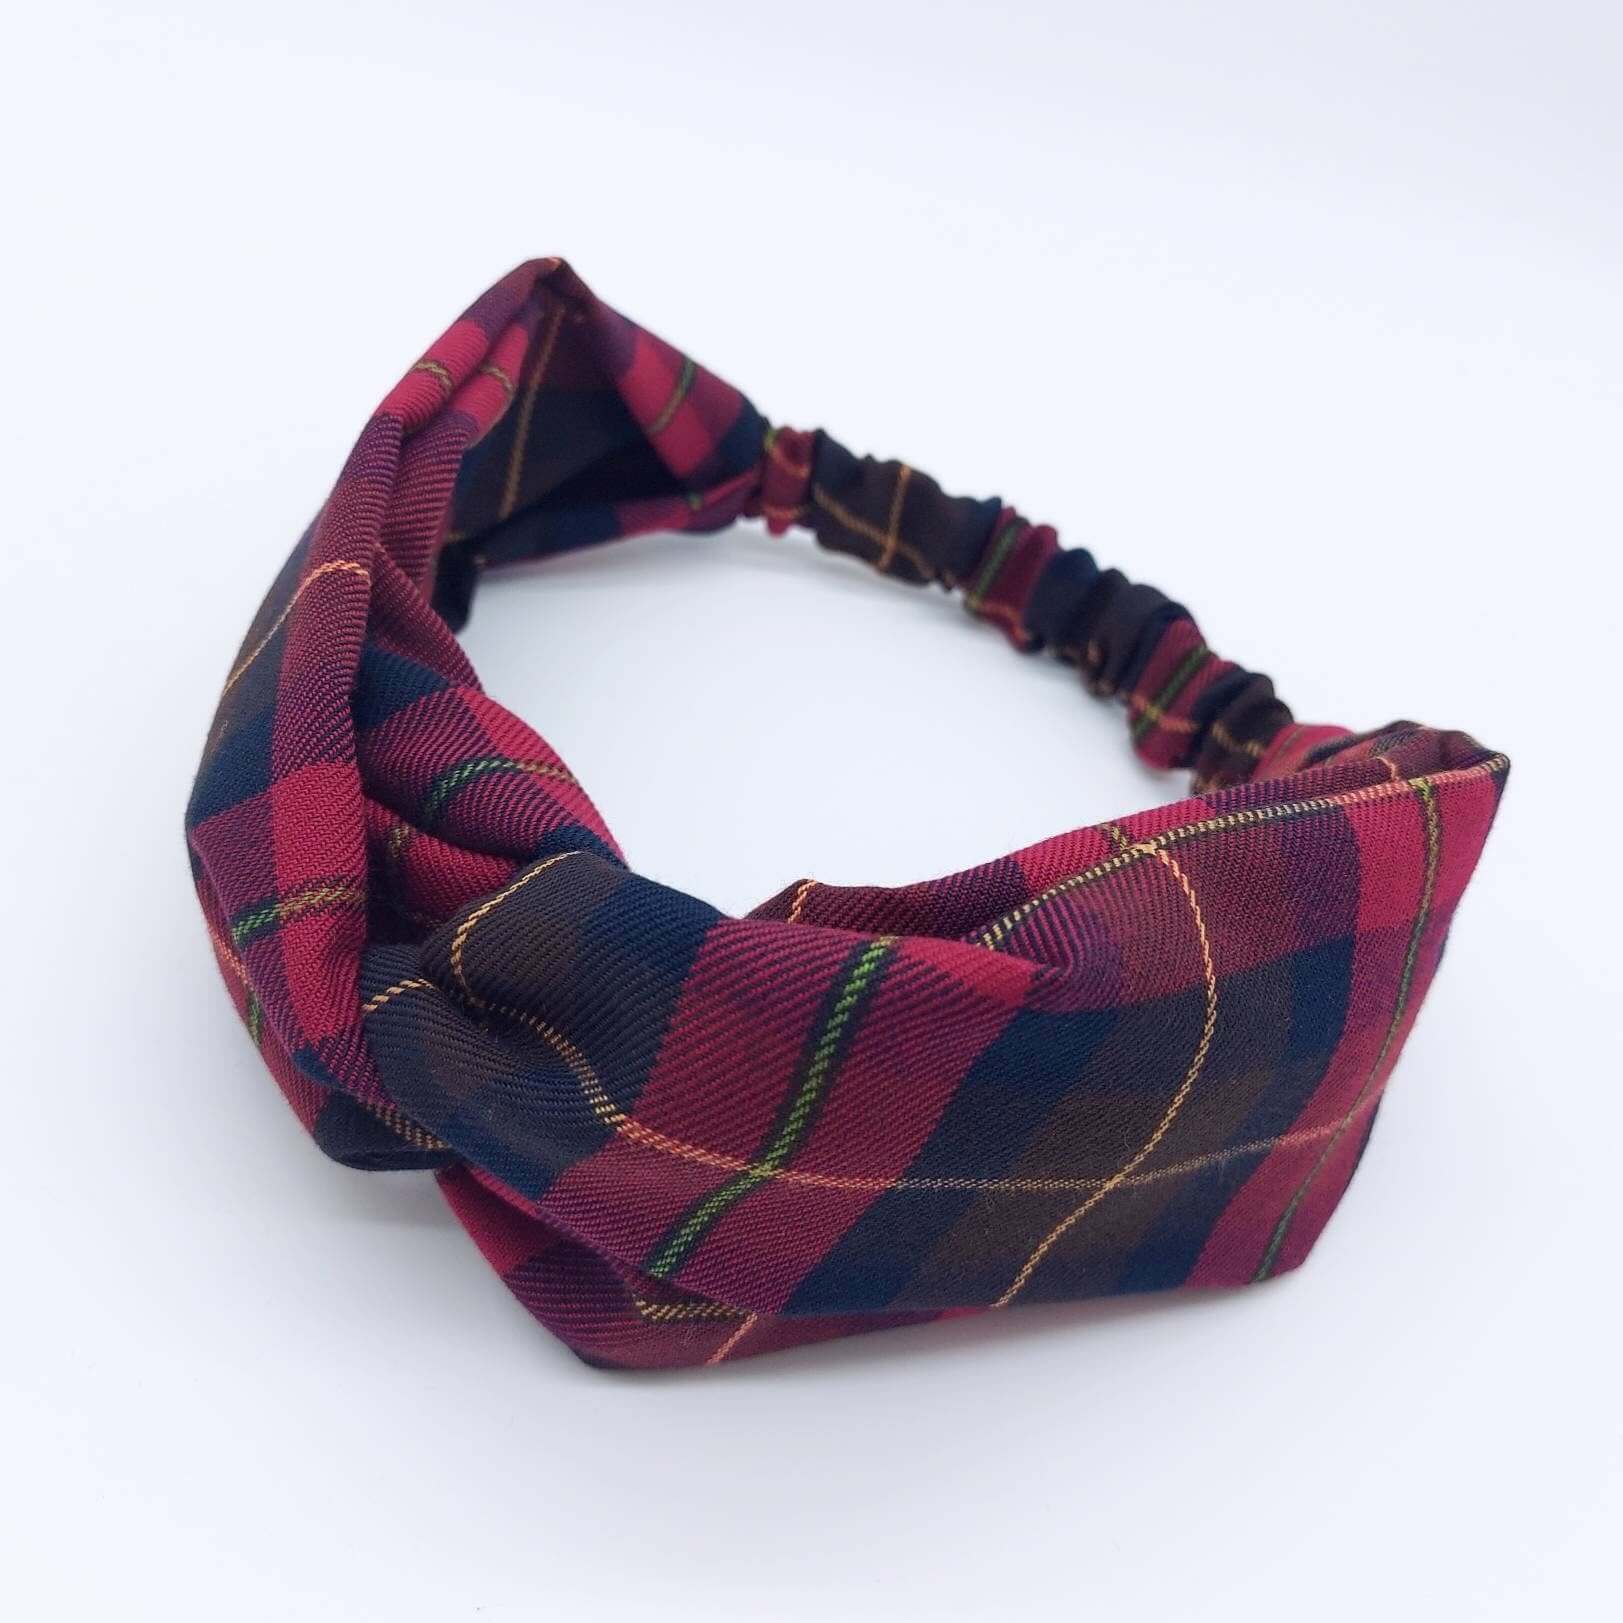 A soft, cranberry red, tartan, plaid, check, elasticated fabric headband, with a turban twist design at the front.